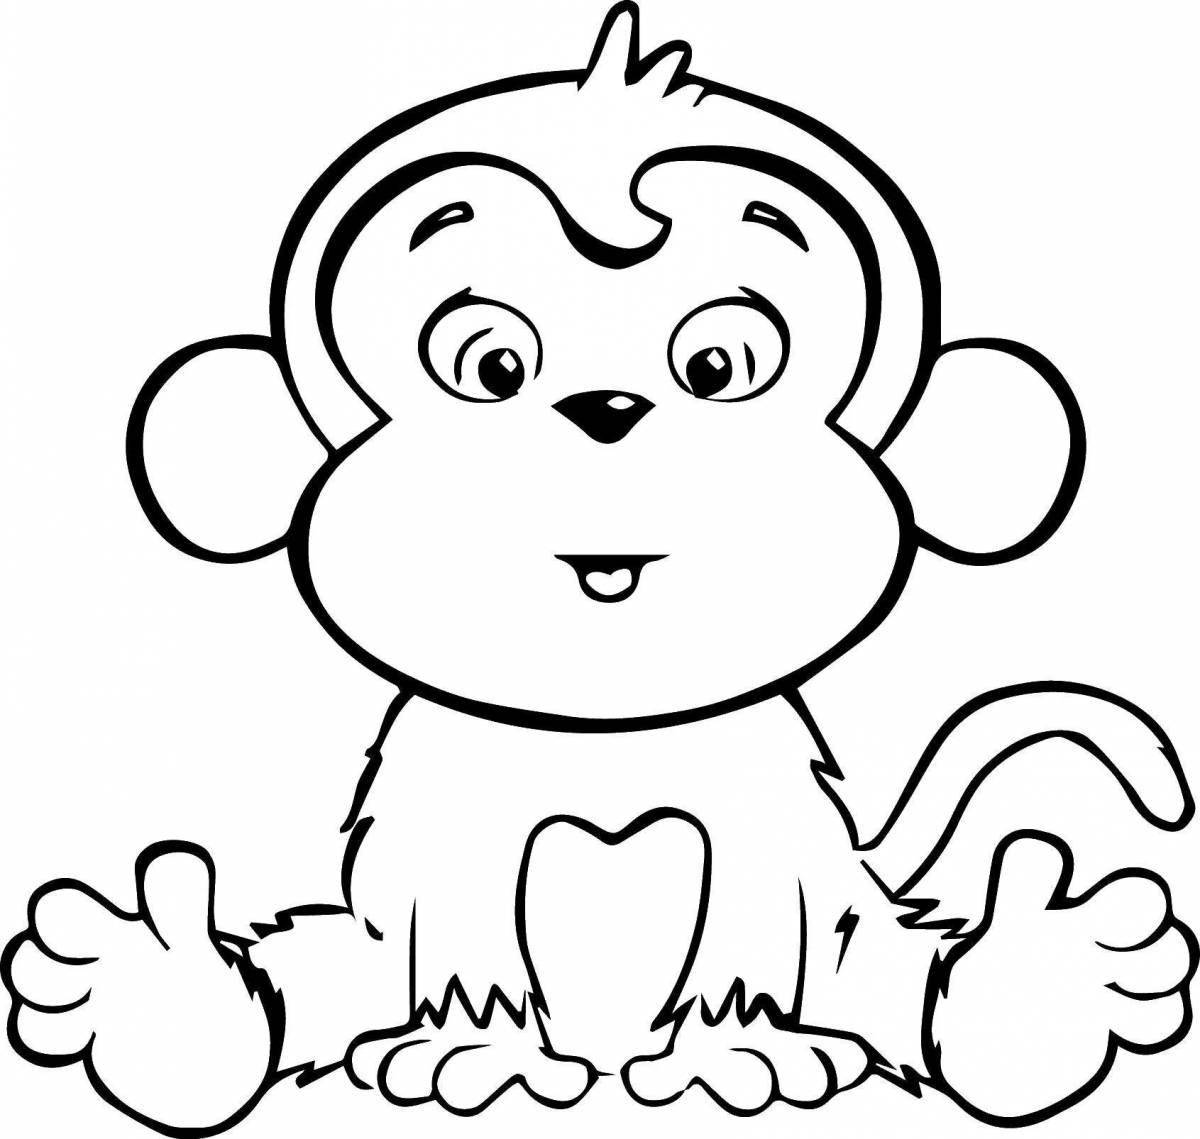 Leaving monkey coloring book